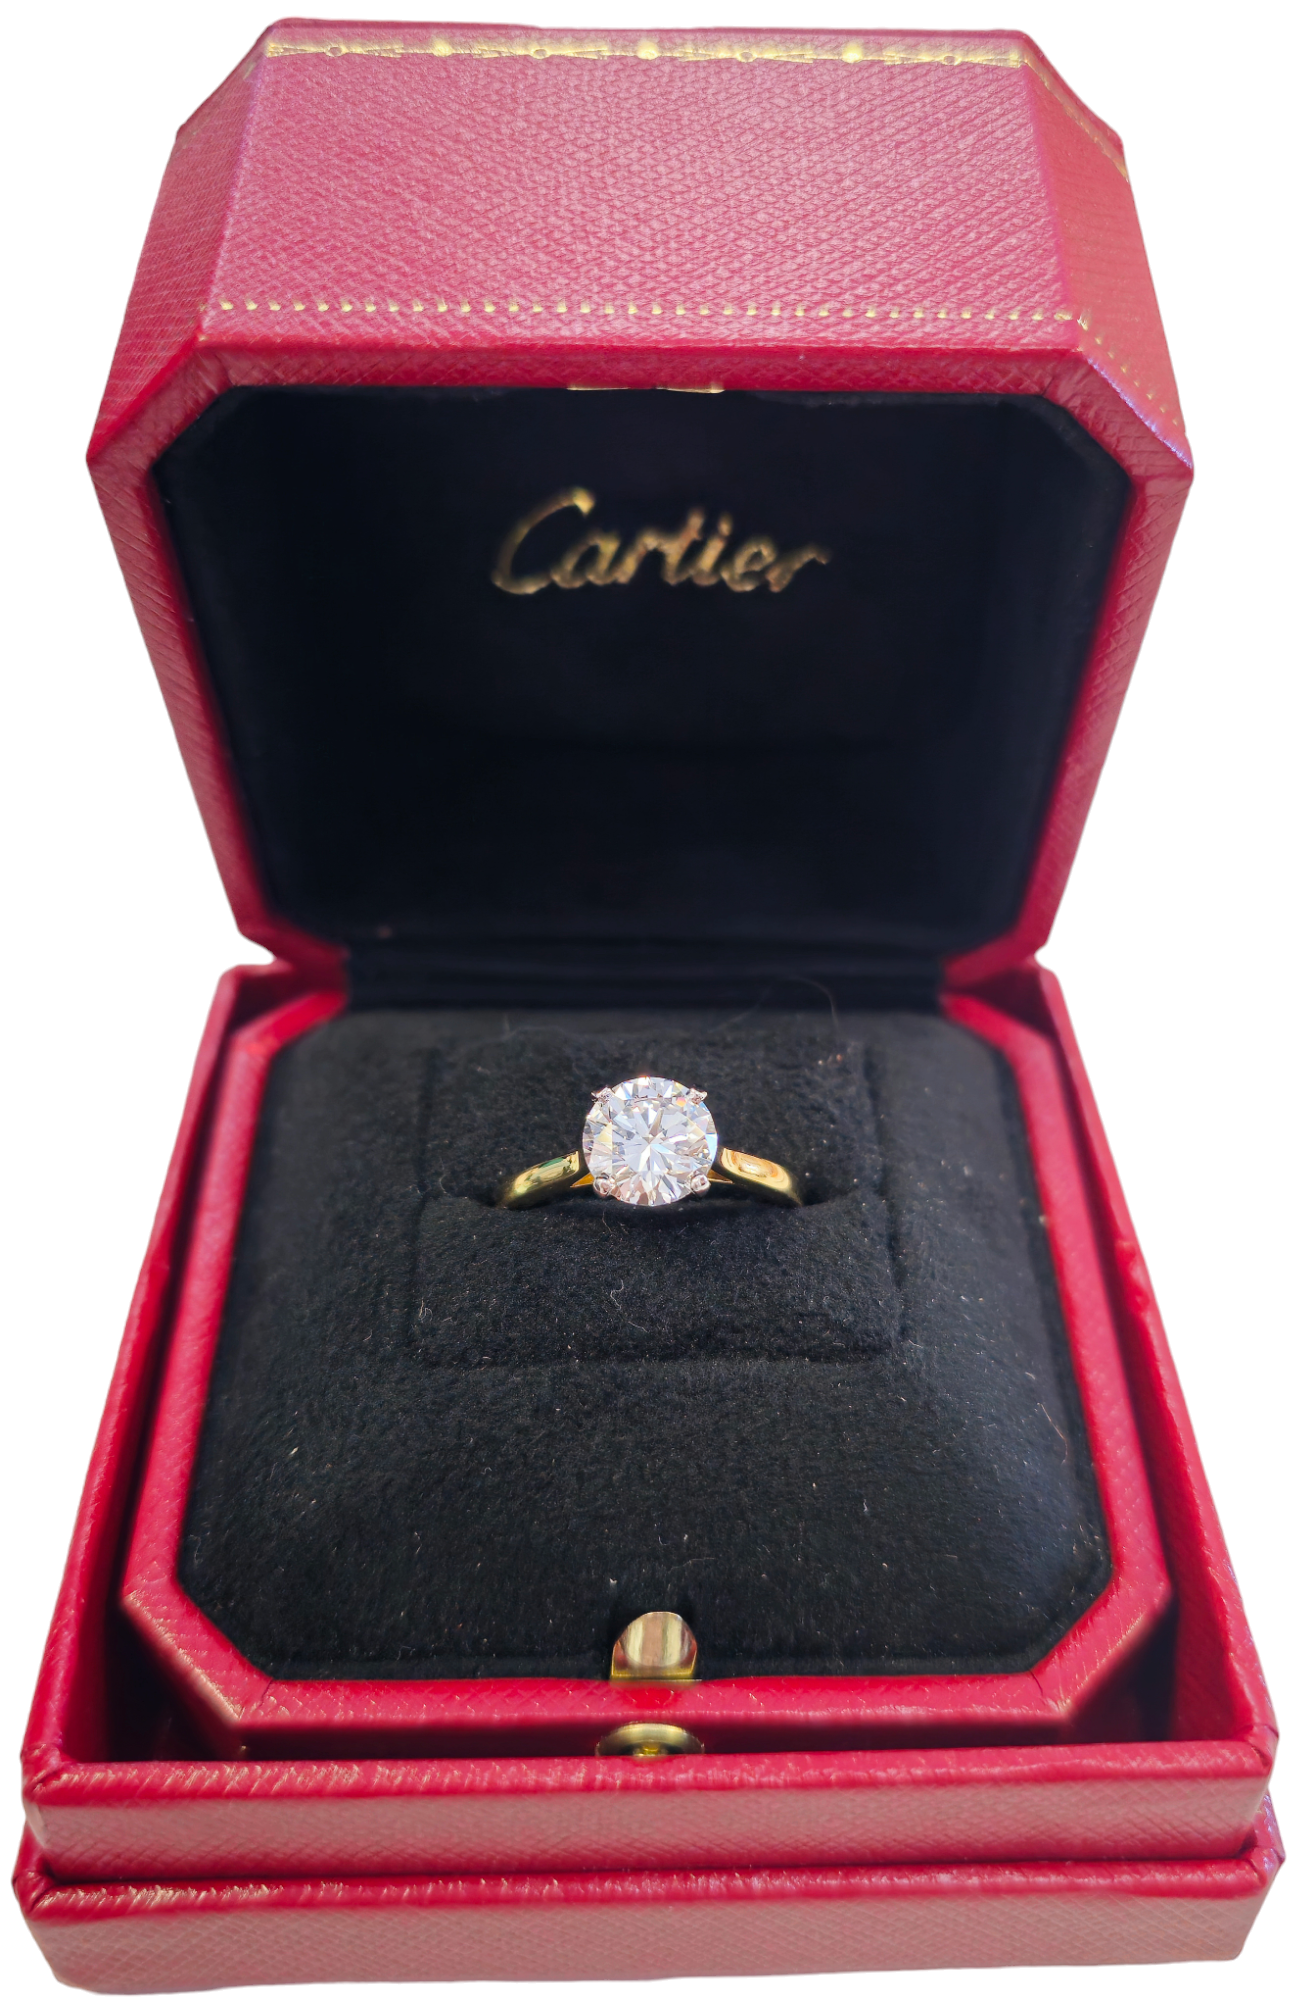 Exceptional Estate Diamond Engagement Ring by Cartier - 66mint Fine Estate  Jewelry